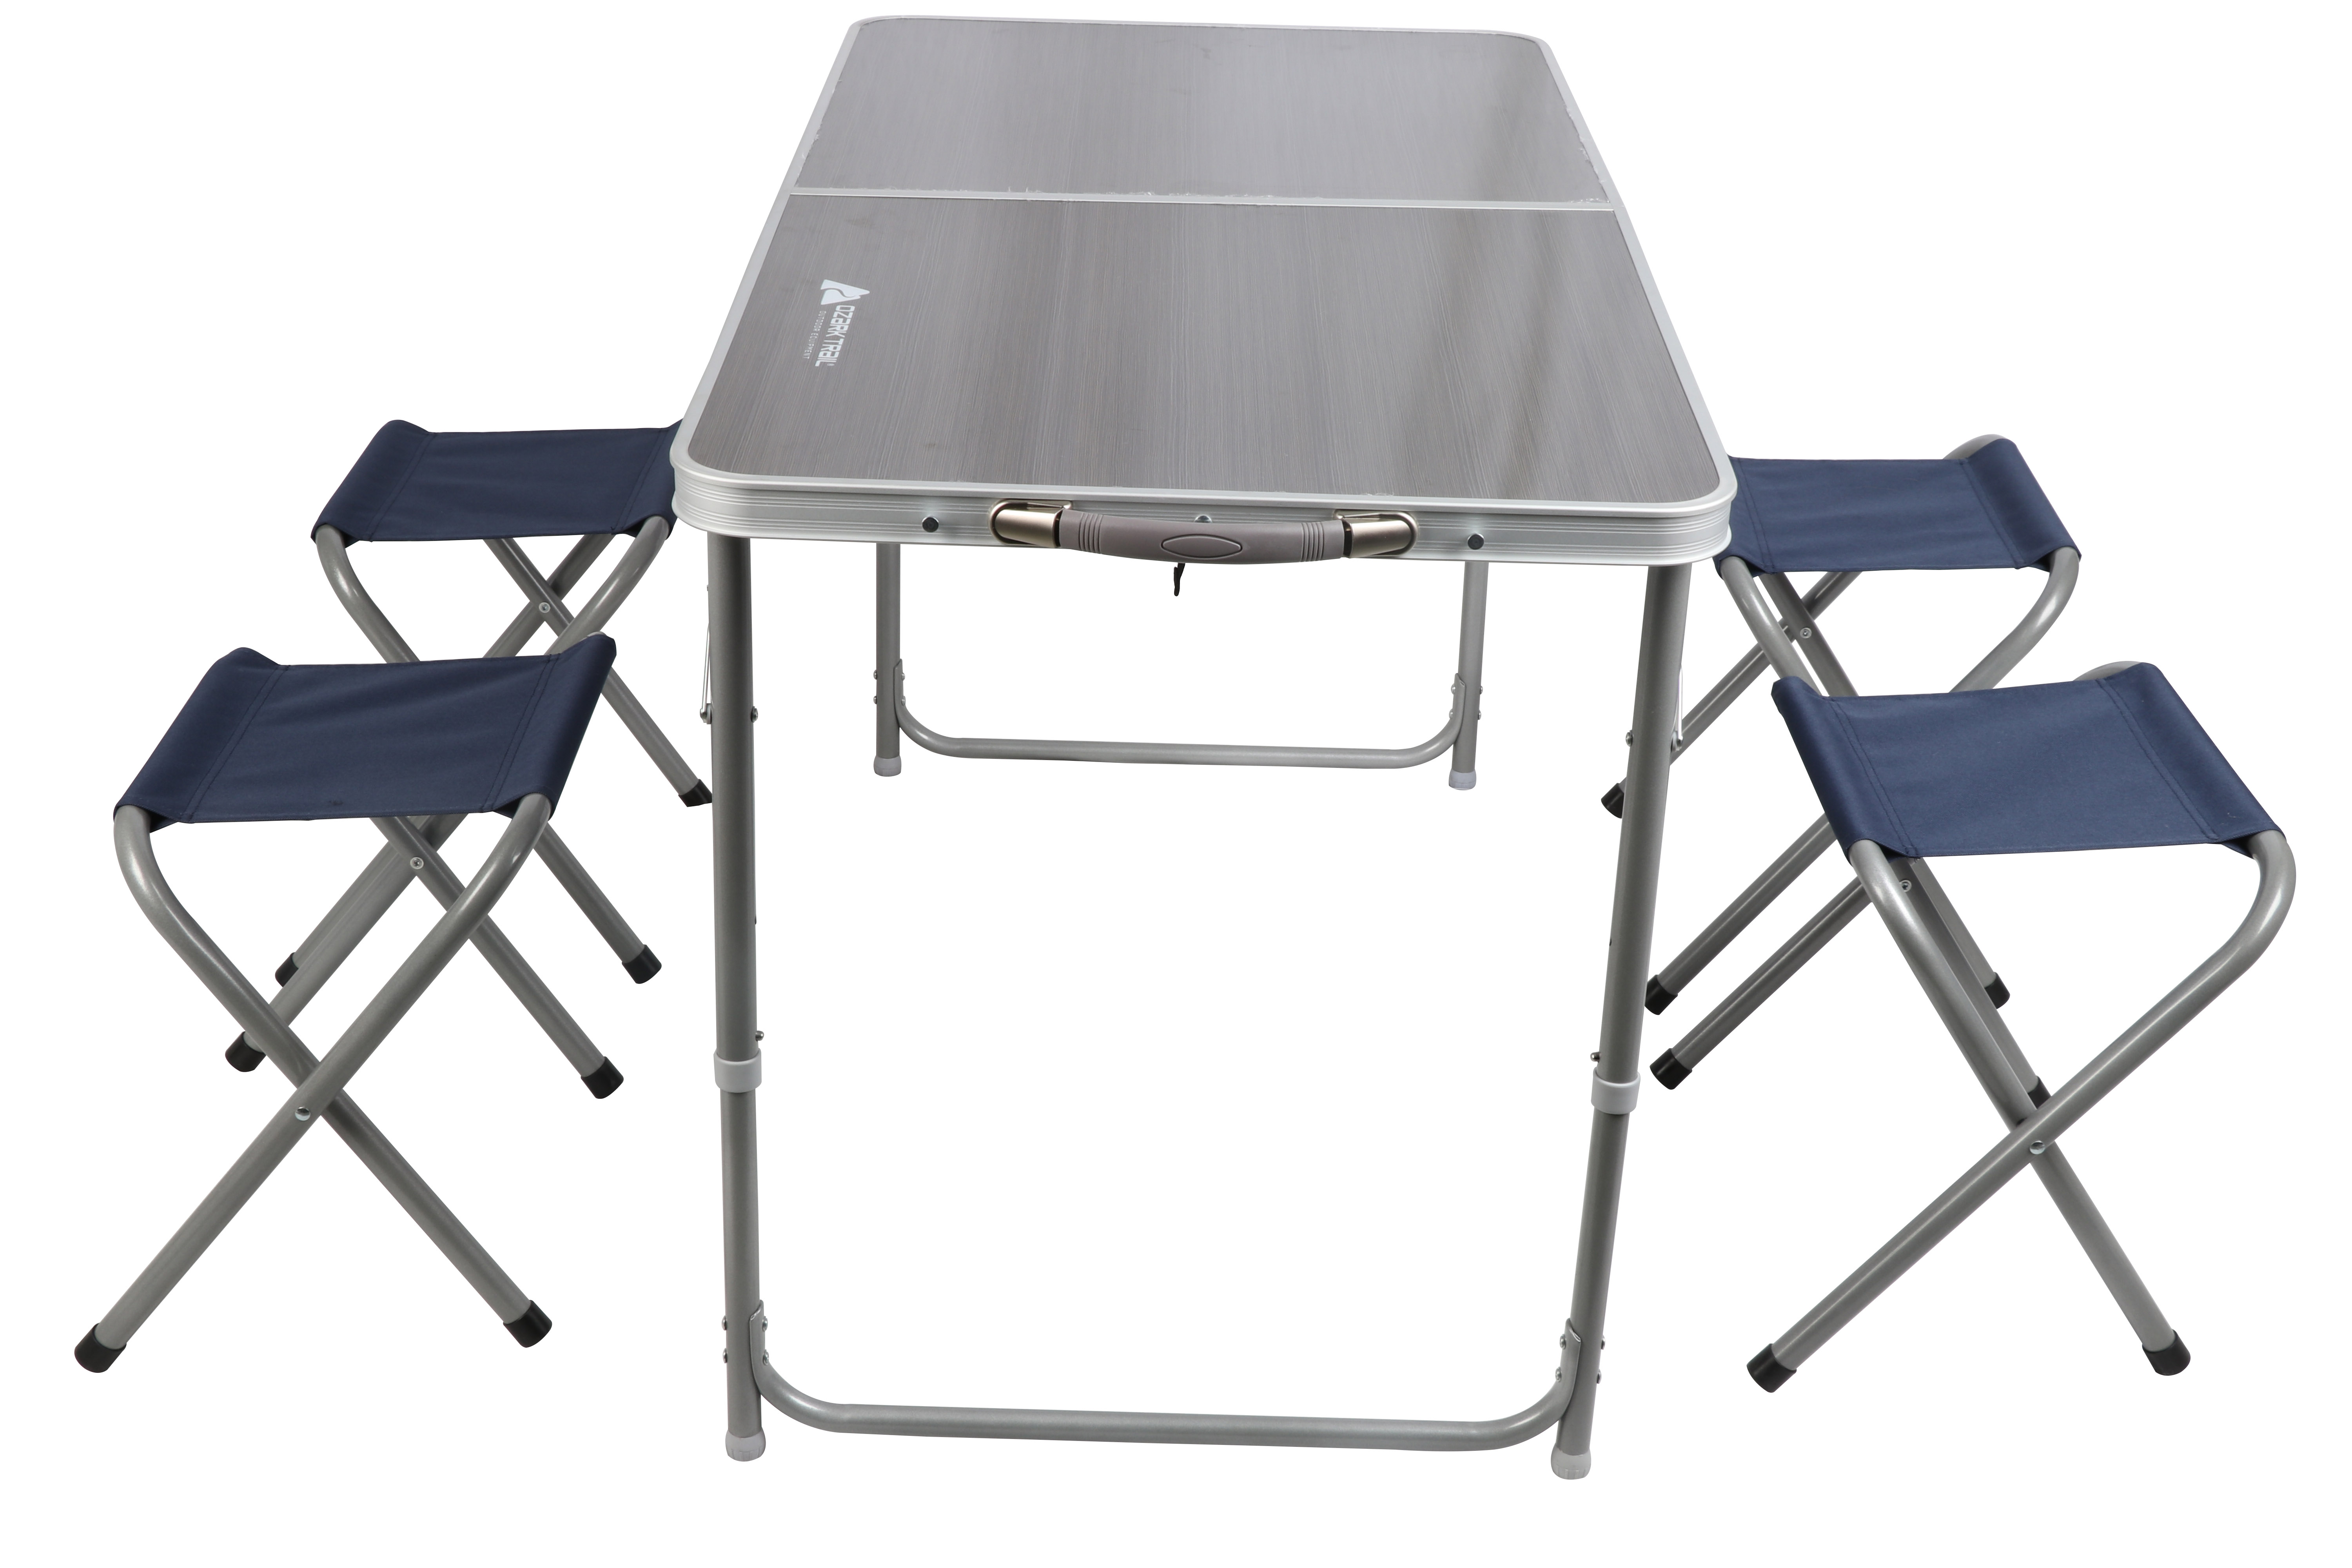 Ozark Trail Durable Steel and Aluminum Table Set with Stools, 47"x24"x21"x27" - image 1 of 9